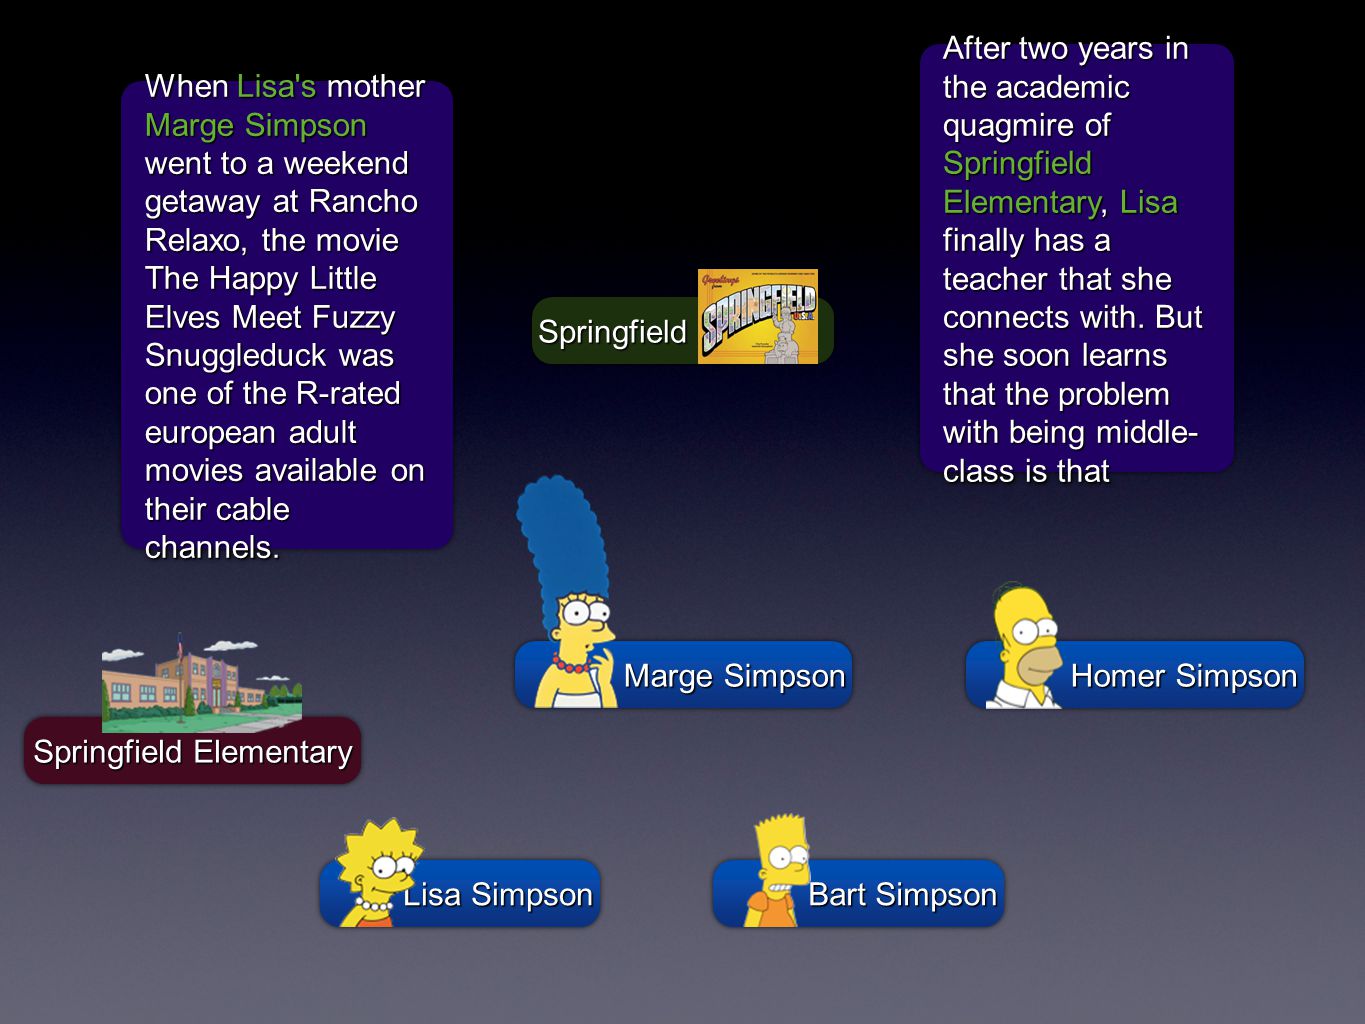 Homer Simpson Bart Simpson Lisa Simpson Marge Simpson Springfield Elementary SpringfieldSpringfield When Lisa s mother Marge Simpson went to a weekend getaway at Rancho Relaxo, the movie The Happy Little Elves Meet Fuzzy Snuggleduck was one of the R-rated european adult movies available on their cable channels.